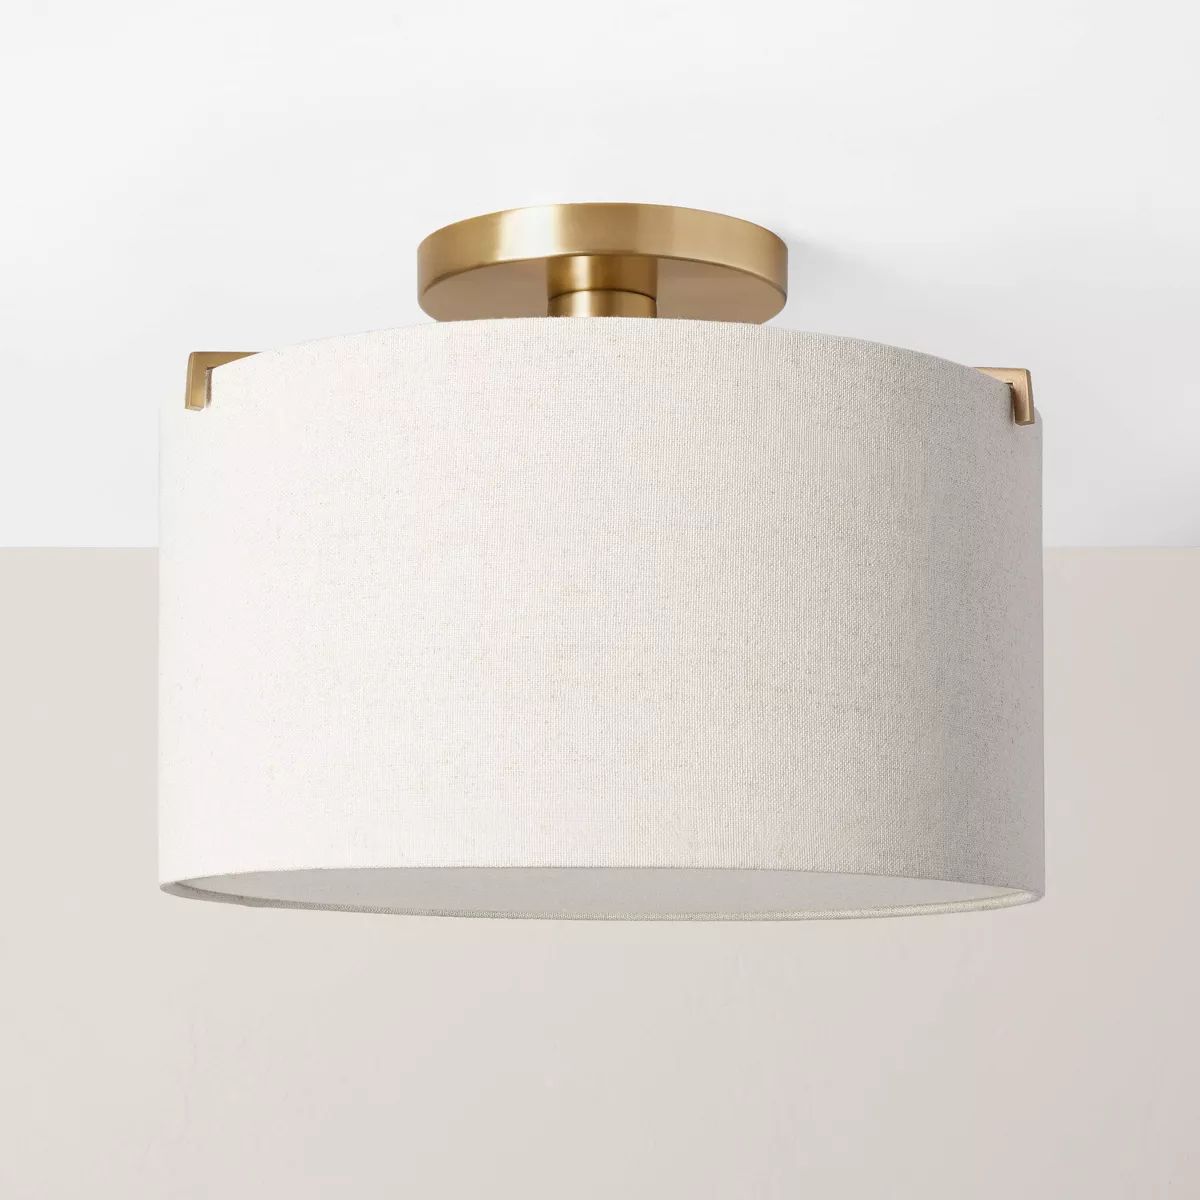 Fabric Shade Semi-Flush Mount Ceiling Light Brass/Oatmeal - Hearth & Hand™ with Magnolia | Target